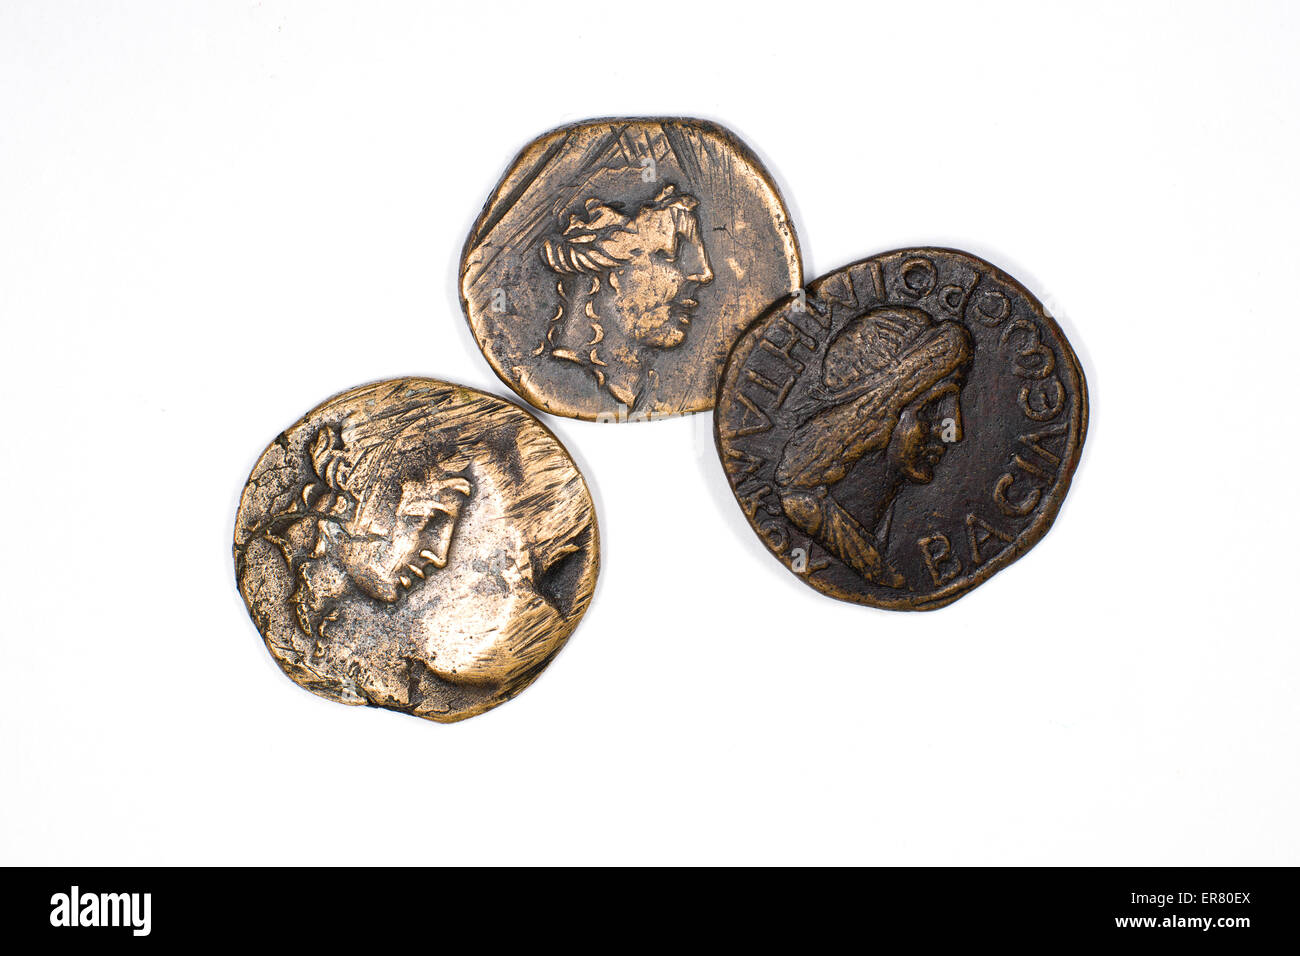 Old bronze coins with portraits of kings on a white background Stock Photo